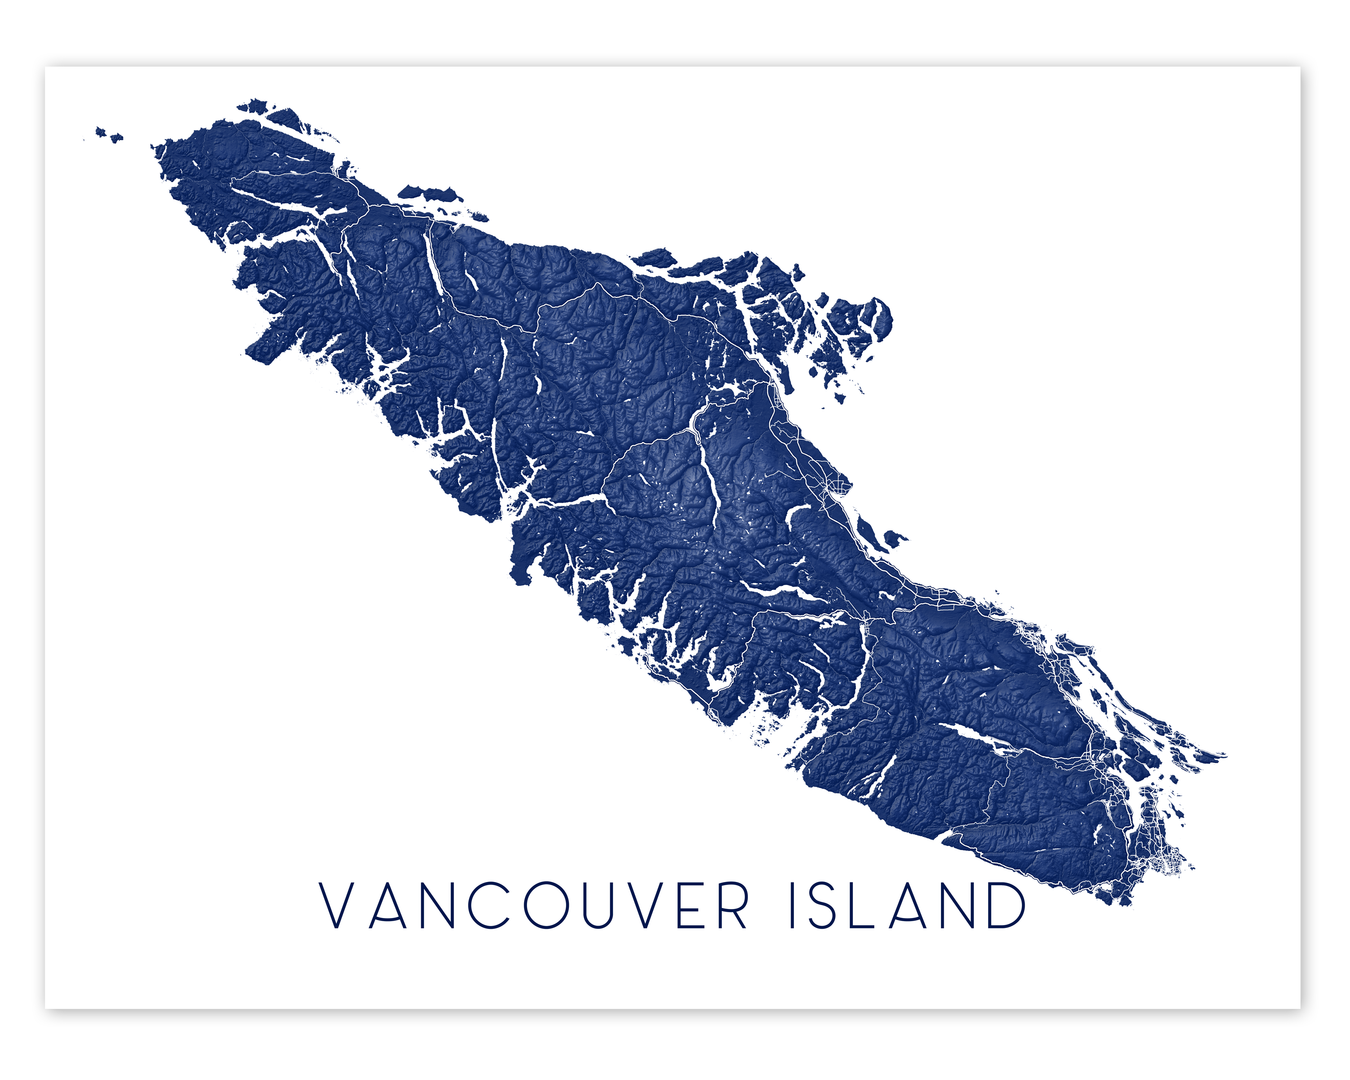 VANCOUVER ISLAND ONLY